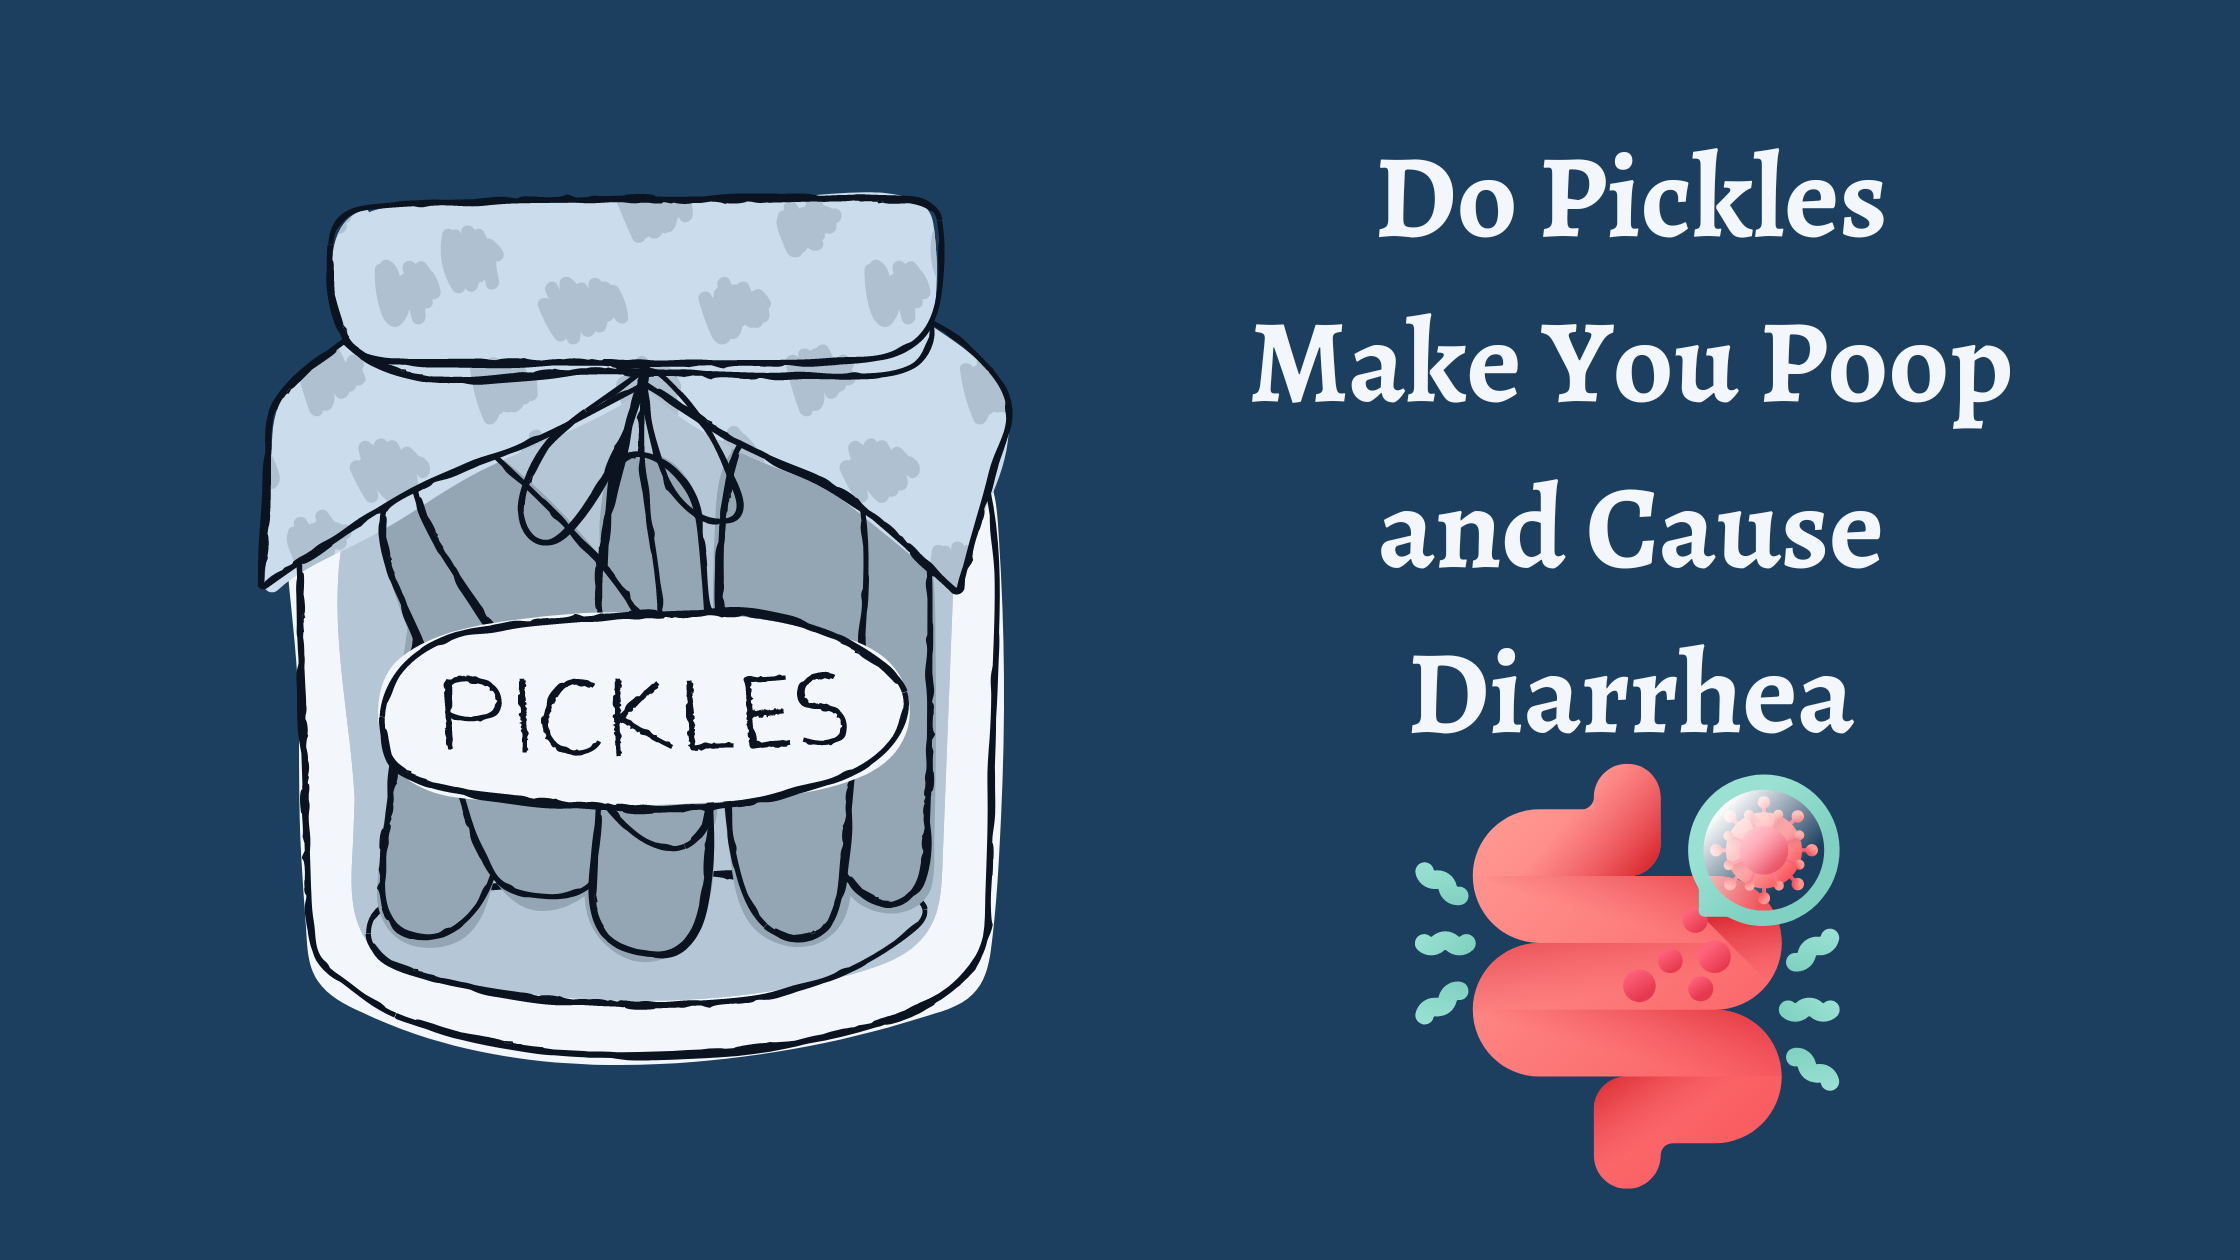 Do Pickles Make You Poop and Cause Diarrhea